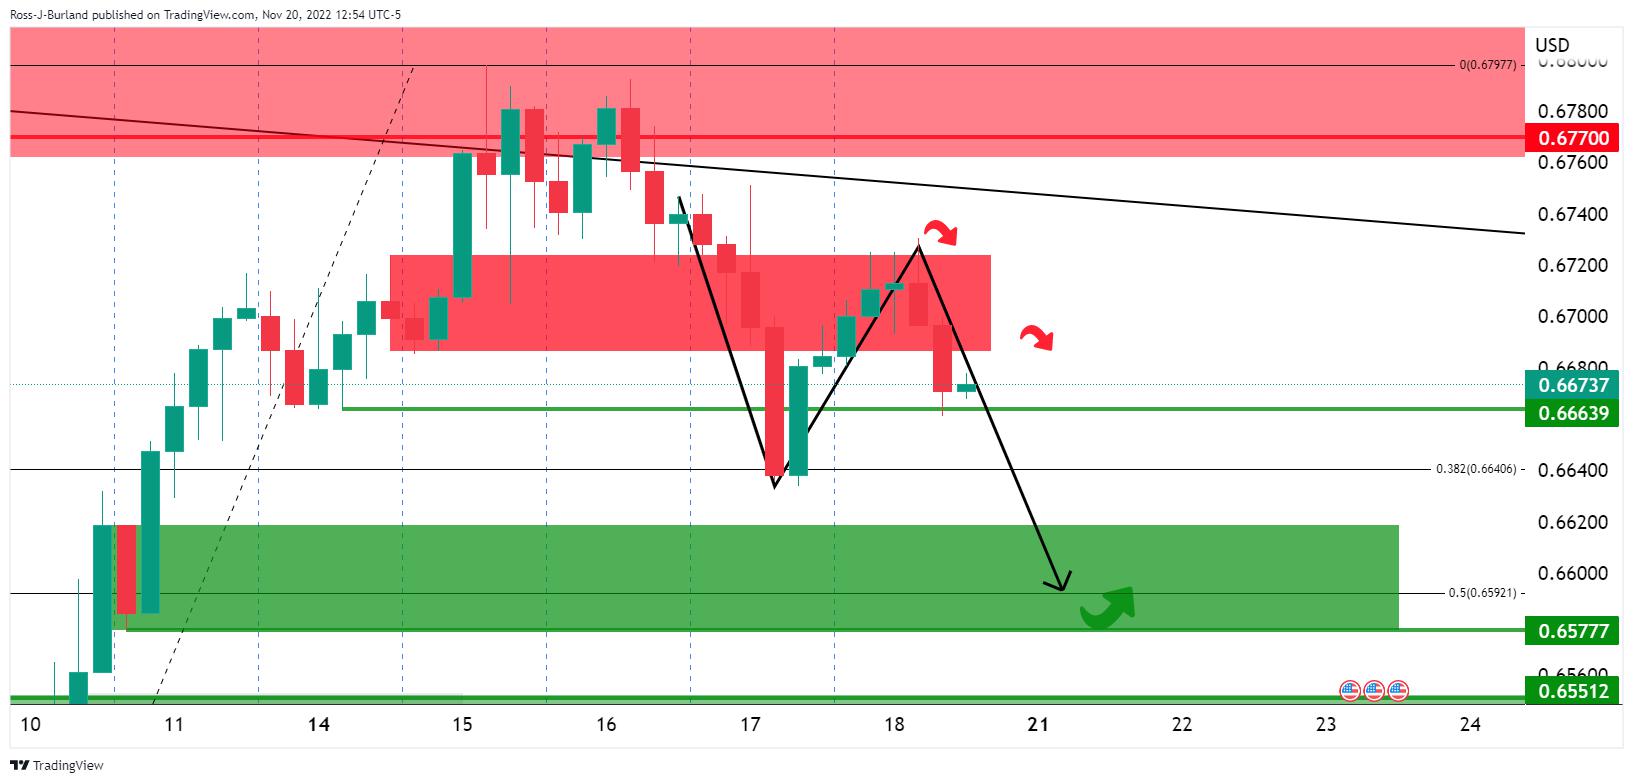 AUDUSD Price Analysis: Bears eye a breakout to the downside for the opening sessions